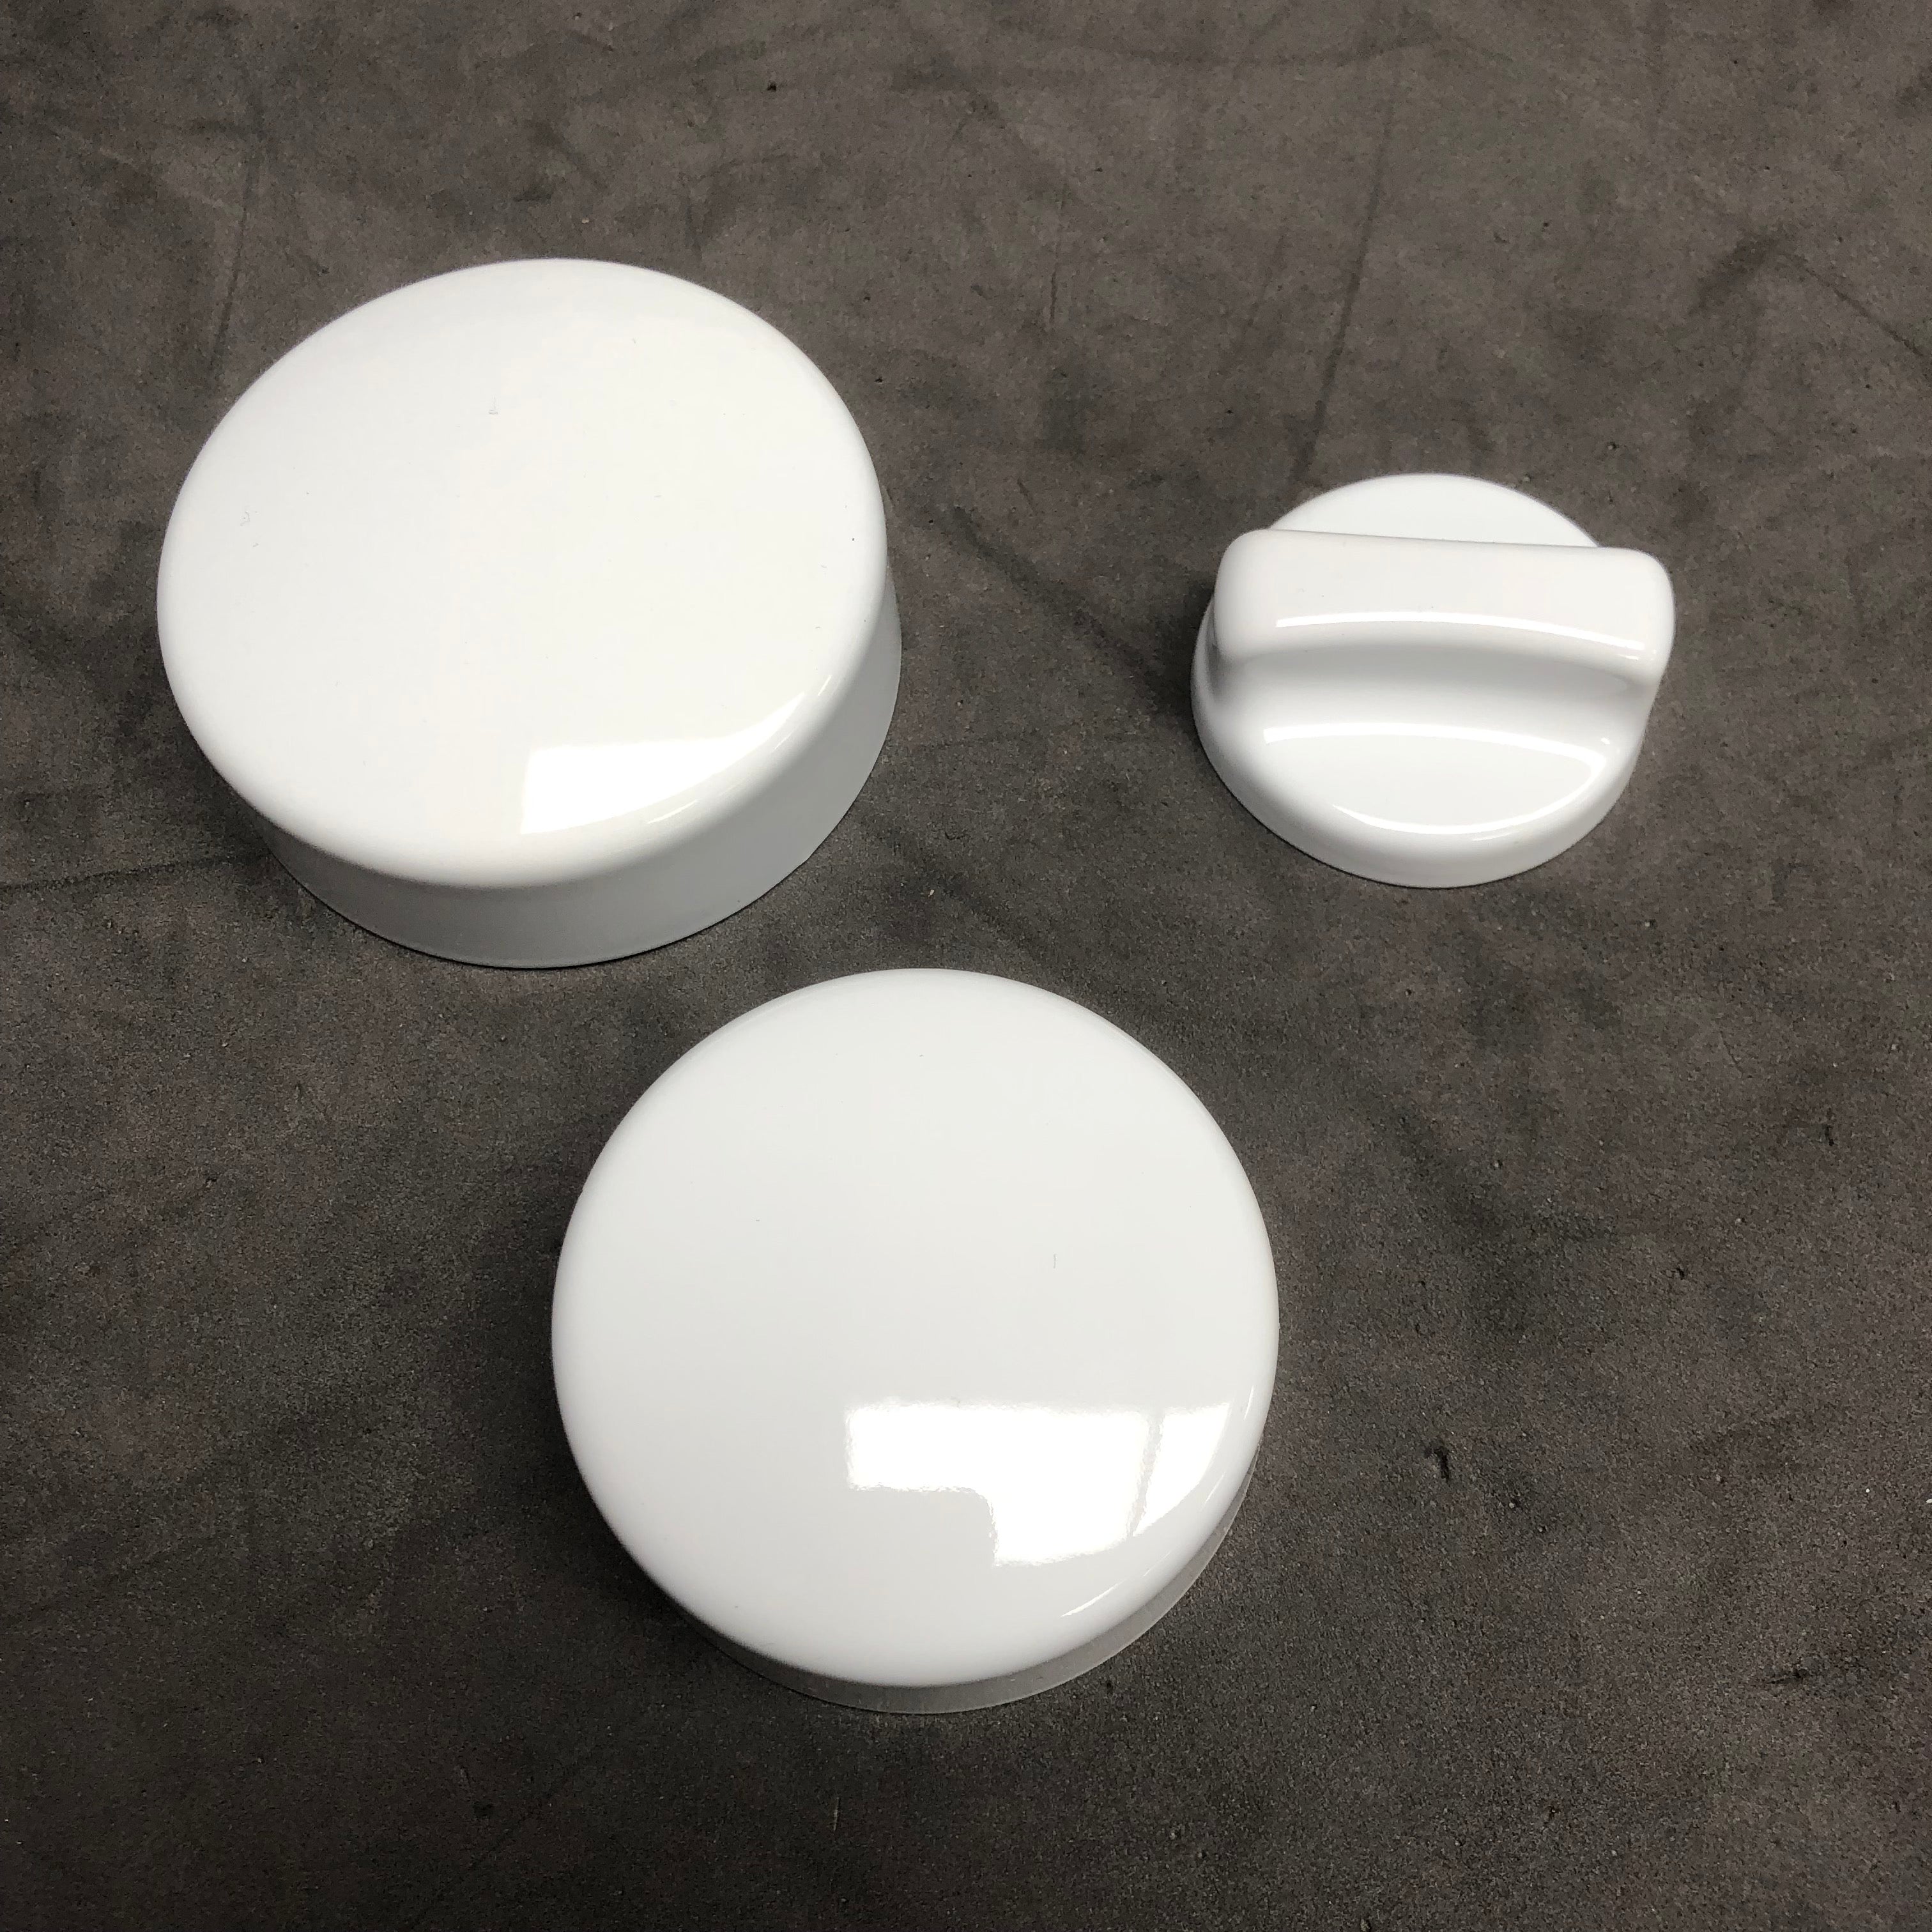 Proform Engine Cap Cover Kit - Mk2/3/4 Focus / Mk 6/7/8 Fiesta (Painted Finishes)